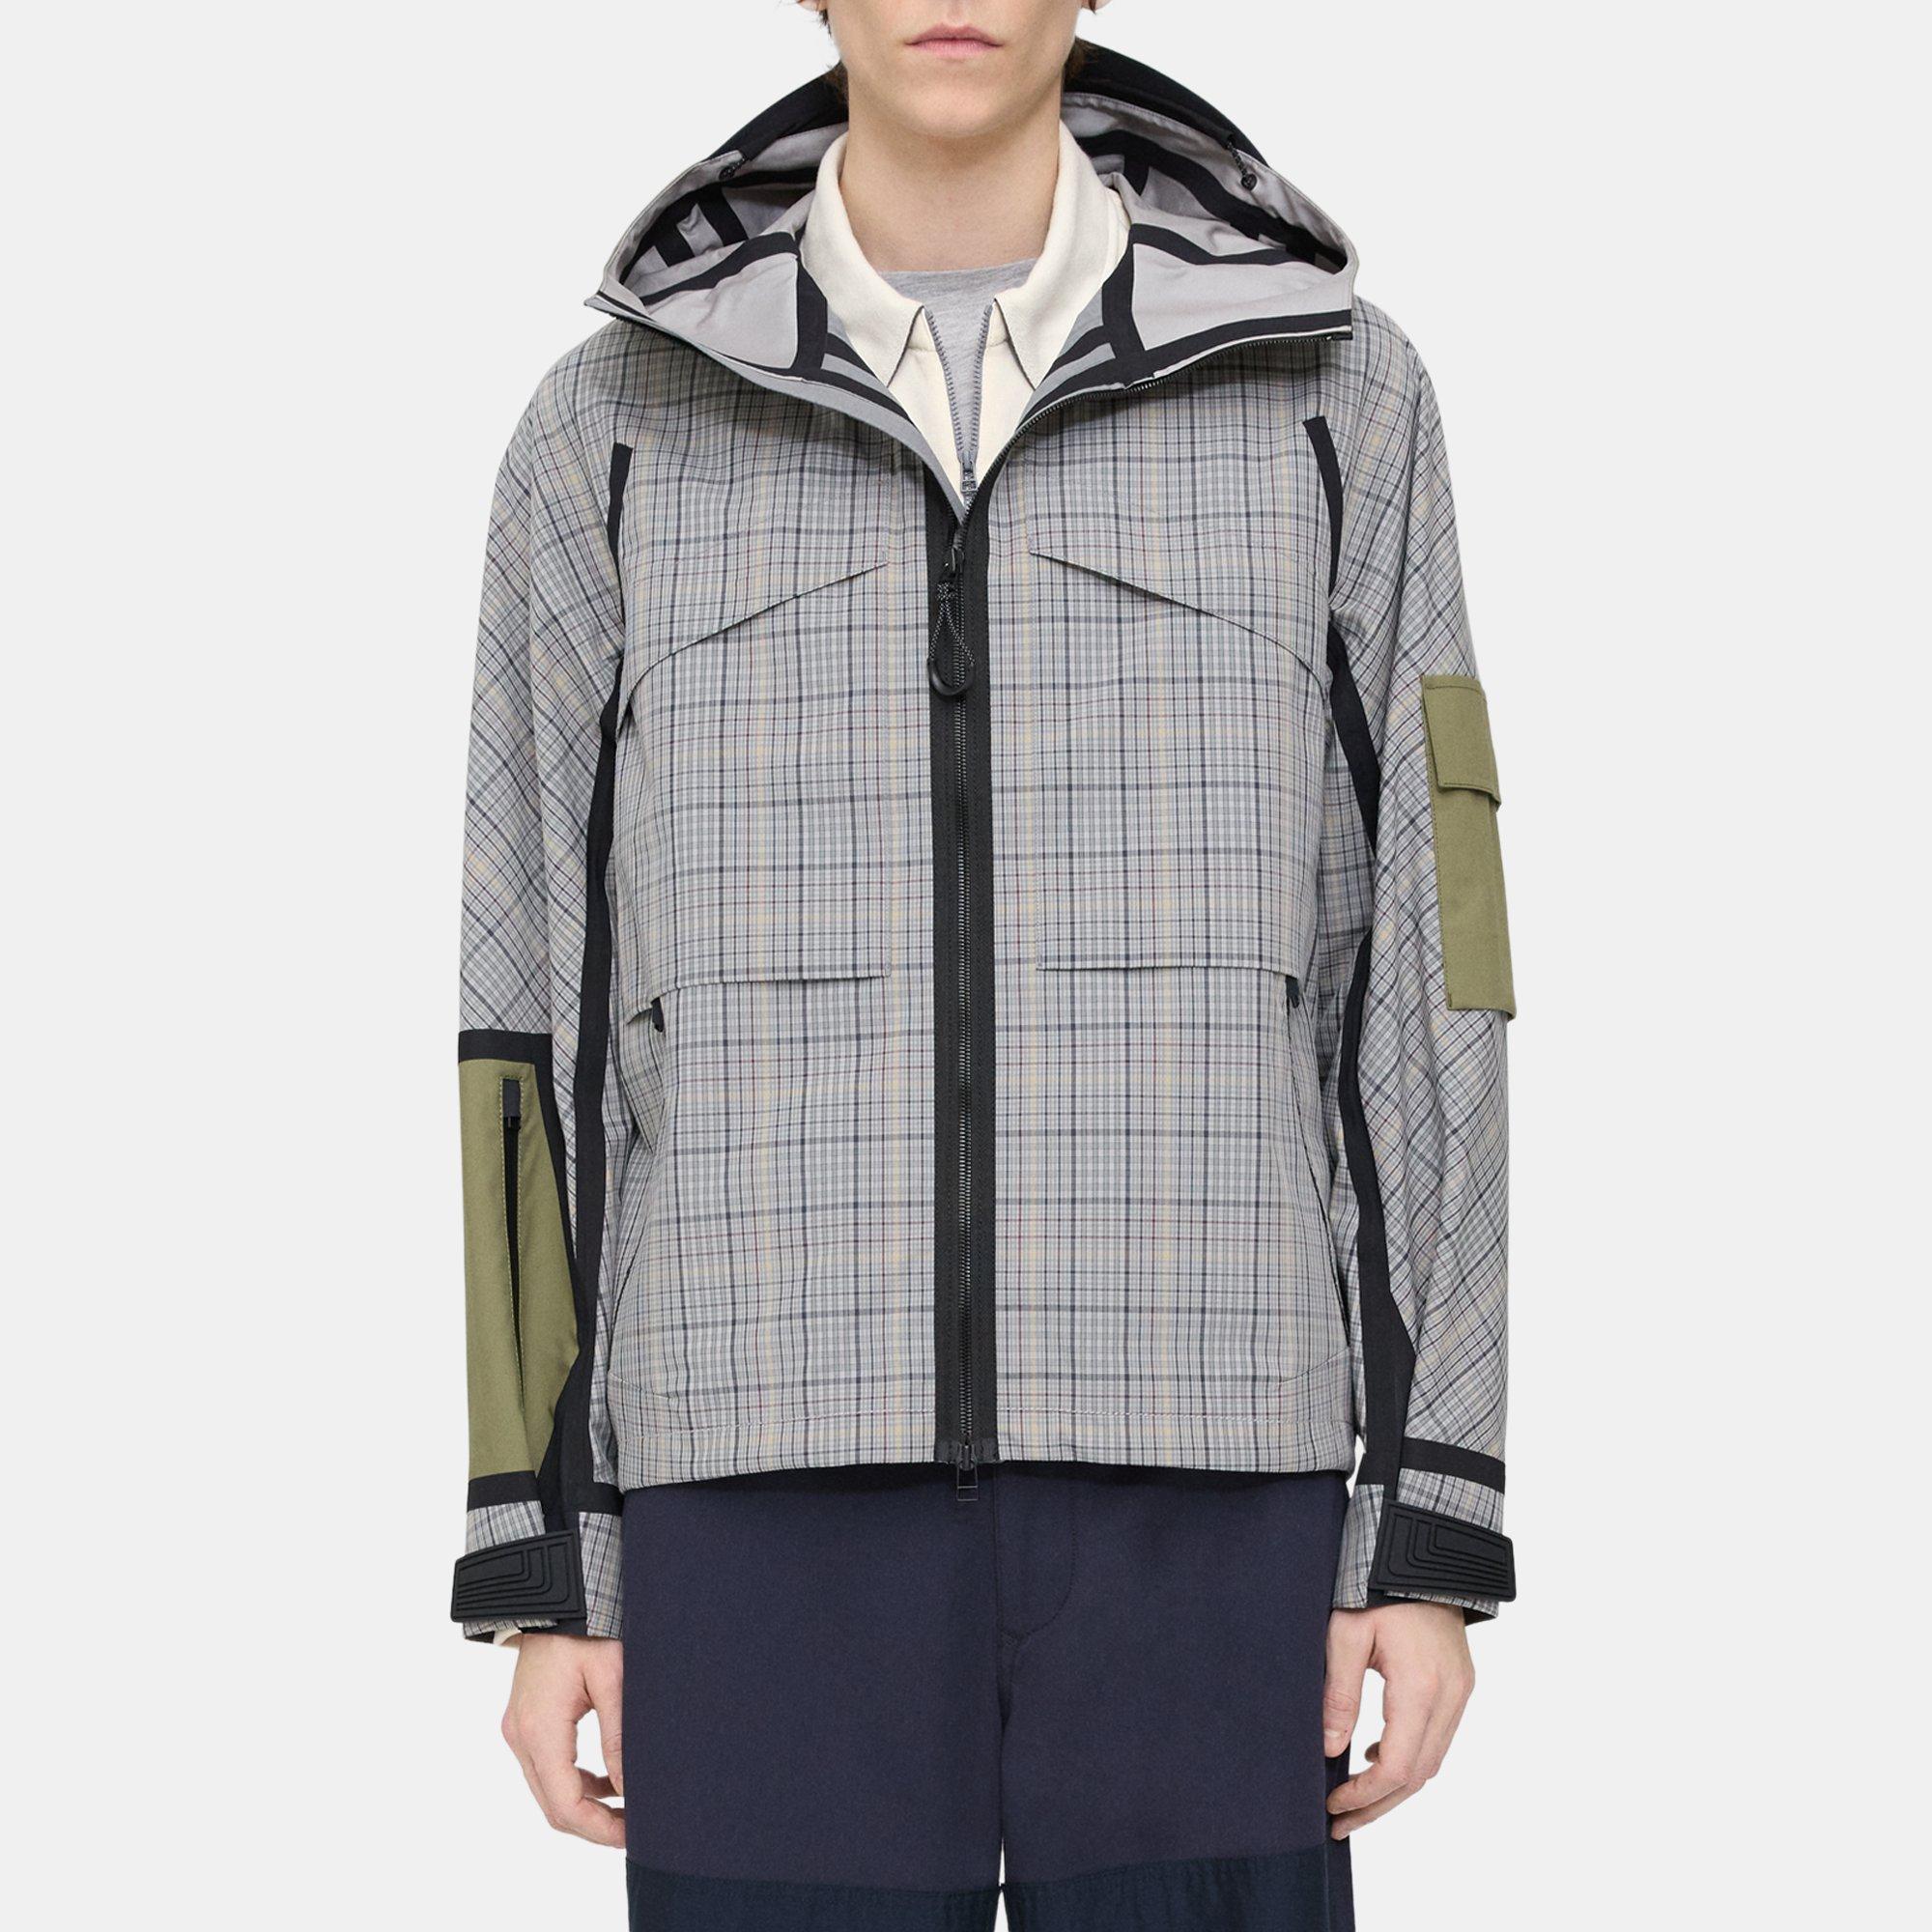 Theory Backed Jacket in Cotton Check